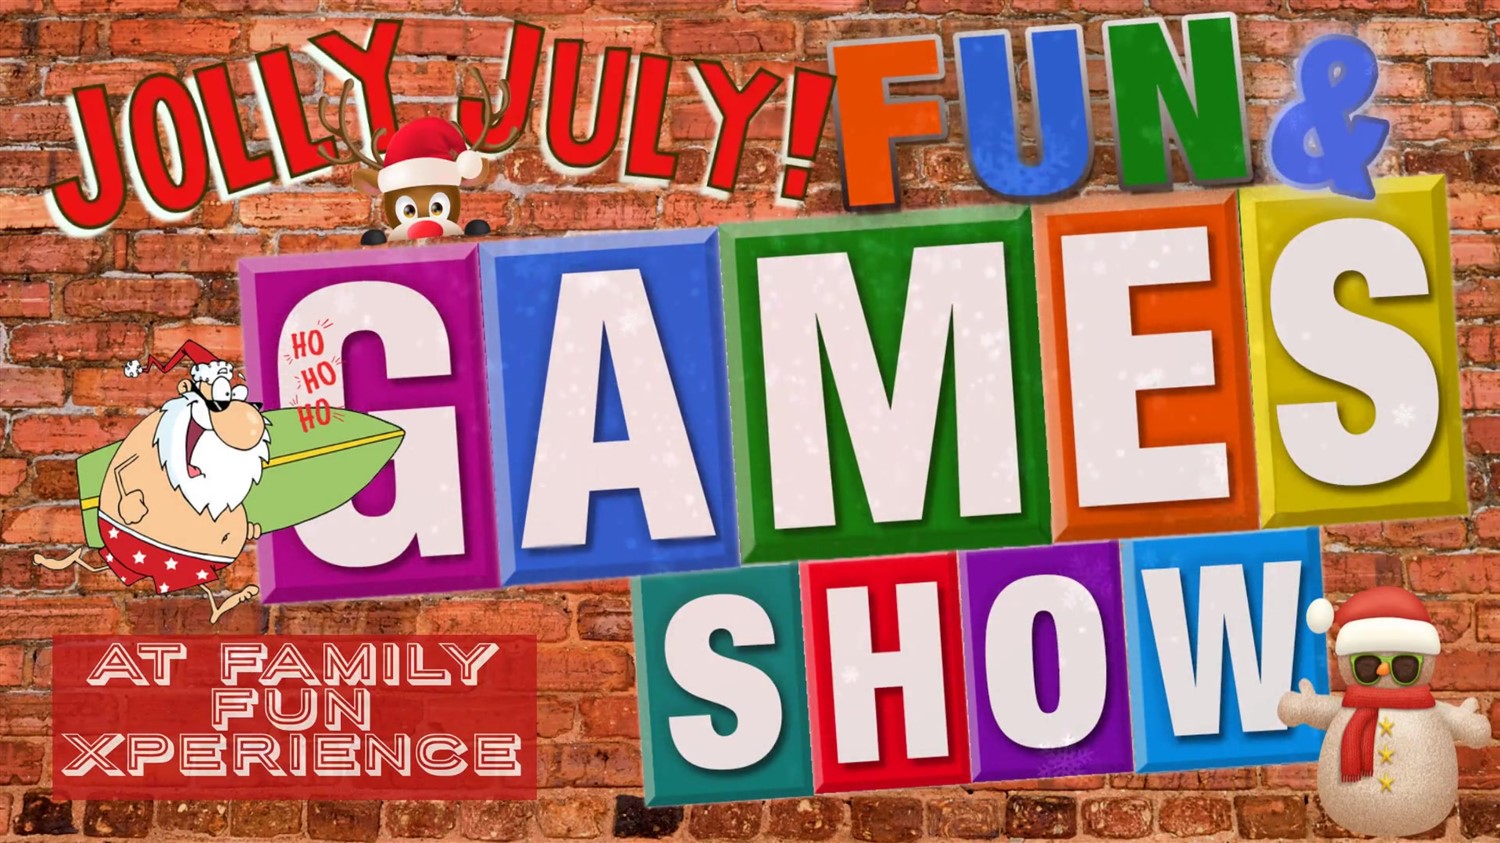 Jolly July Edition - FUN & GAMES SHOW! 5 Star Fun for the whole family! on Jul 26, 19:00@FFX Theatre - Pick a seat, Buy tickets and Get information on Family Fun Xperience tickets.ffxshow.org